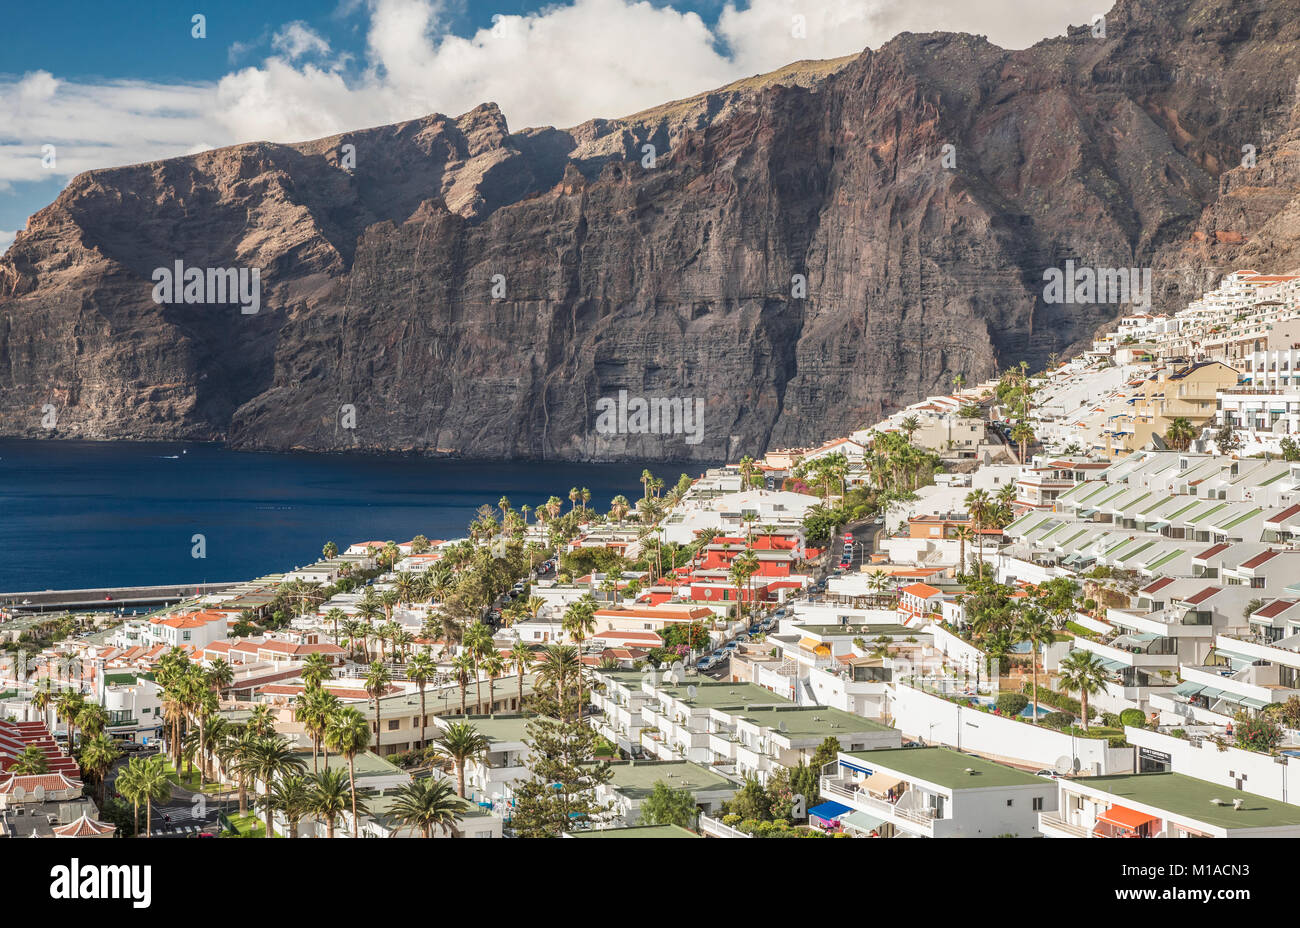 The tourist resort town of Los Gigantes, Tenerife, Canary Islands, with the famous giant cliffs from which the town gets its name in the background, Stock Photo